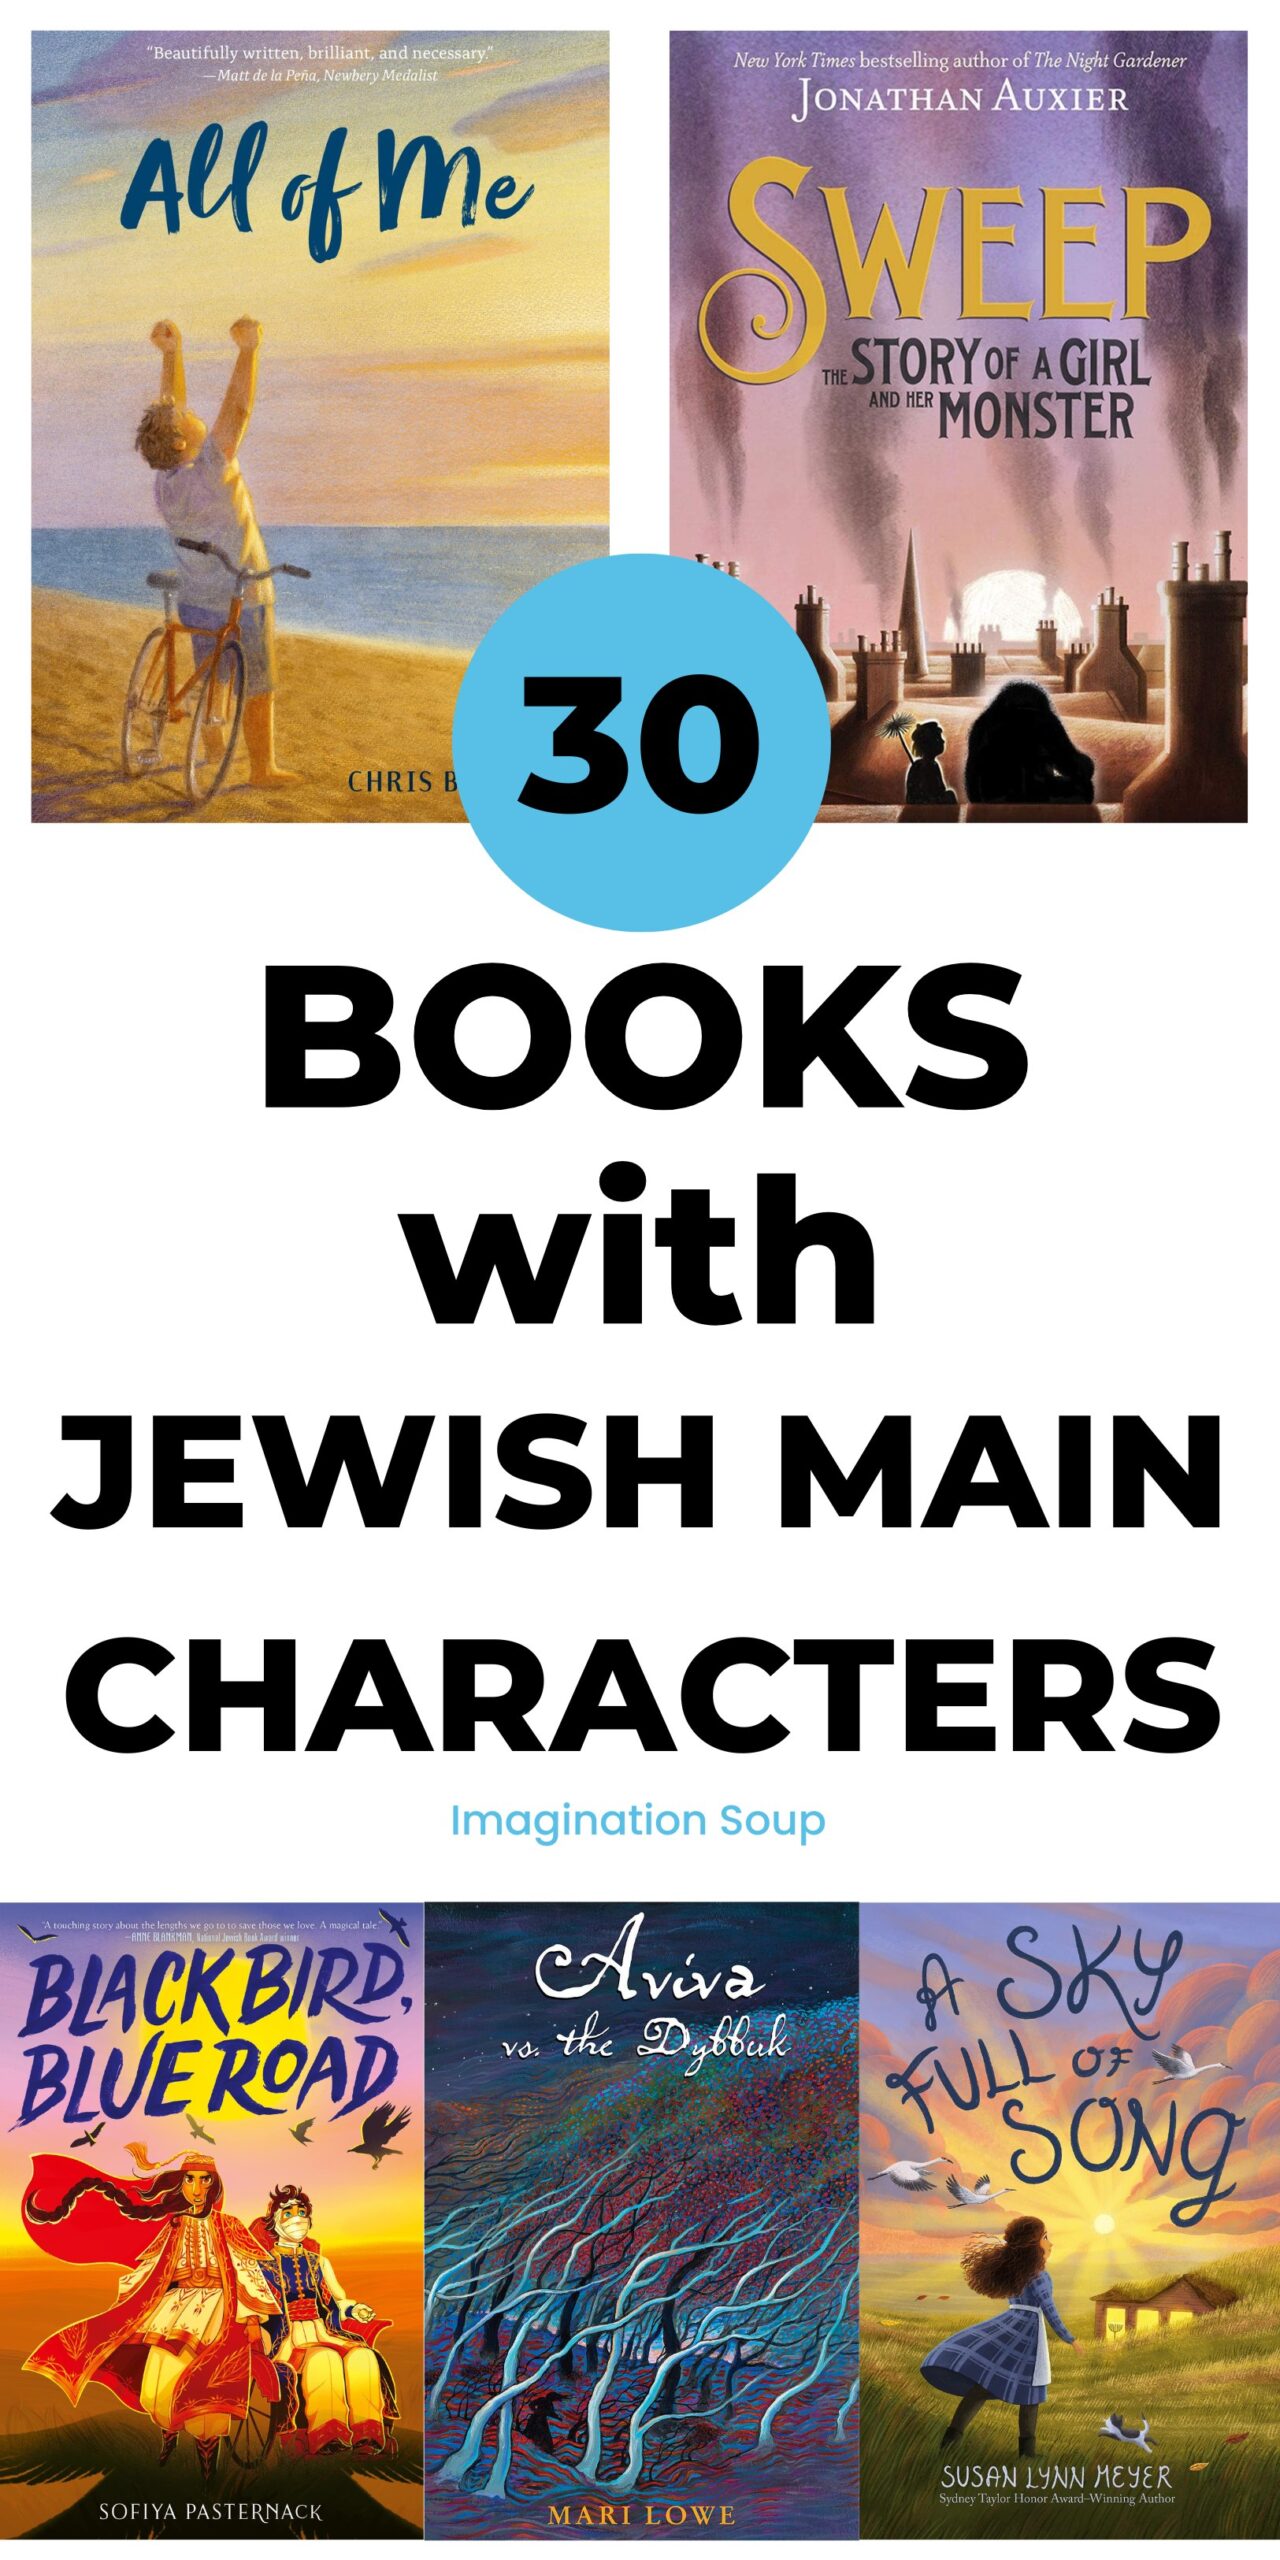 Honor Jewish culture by reading Jewish books with Jewish main characters! These fictional children's books fill a much-needed gap in children's literature because there just hasn't been enough Jewish representation...and I'm happy to see this body of literature growing in quantity with high-quality books about the Jewish culture, religion, and heritage.